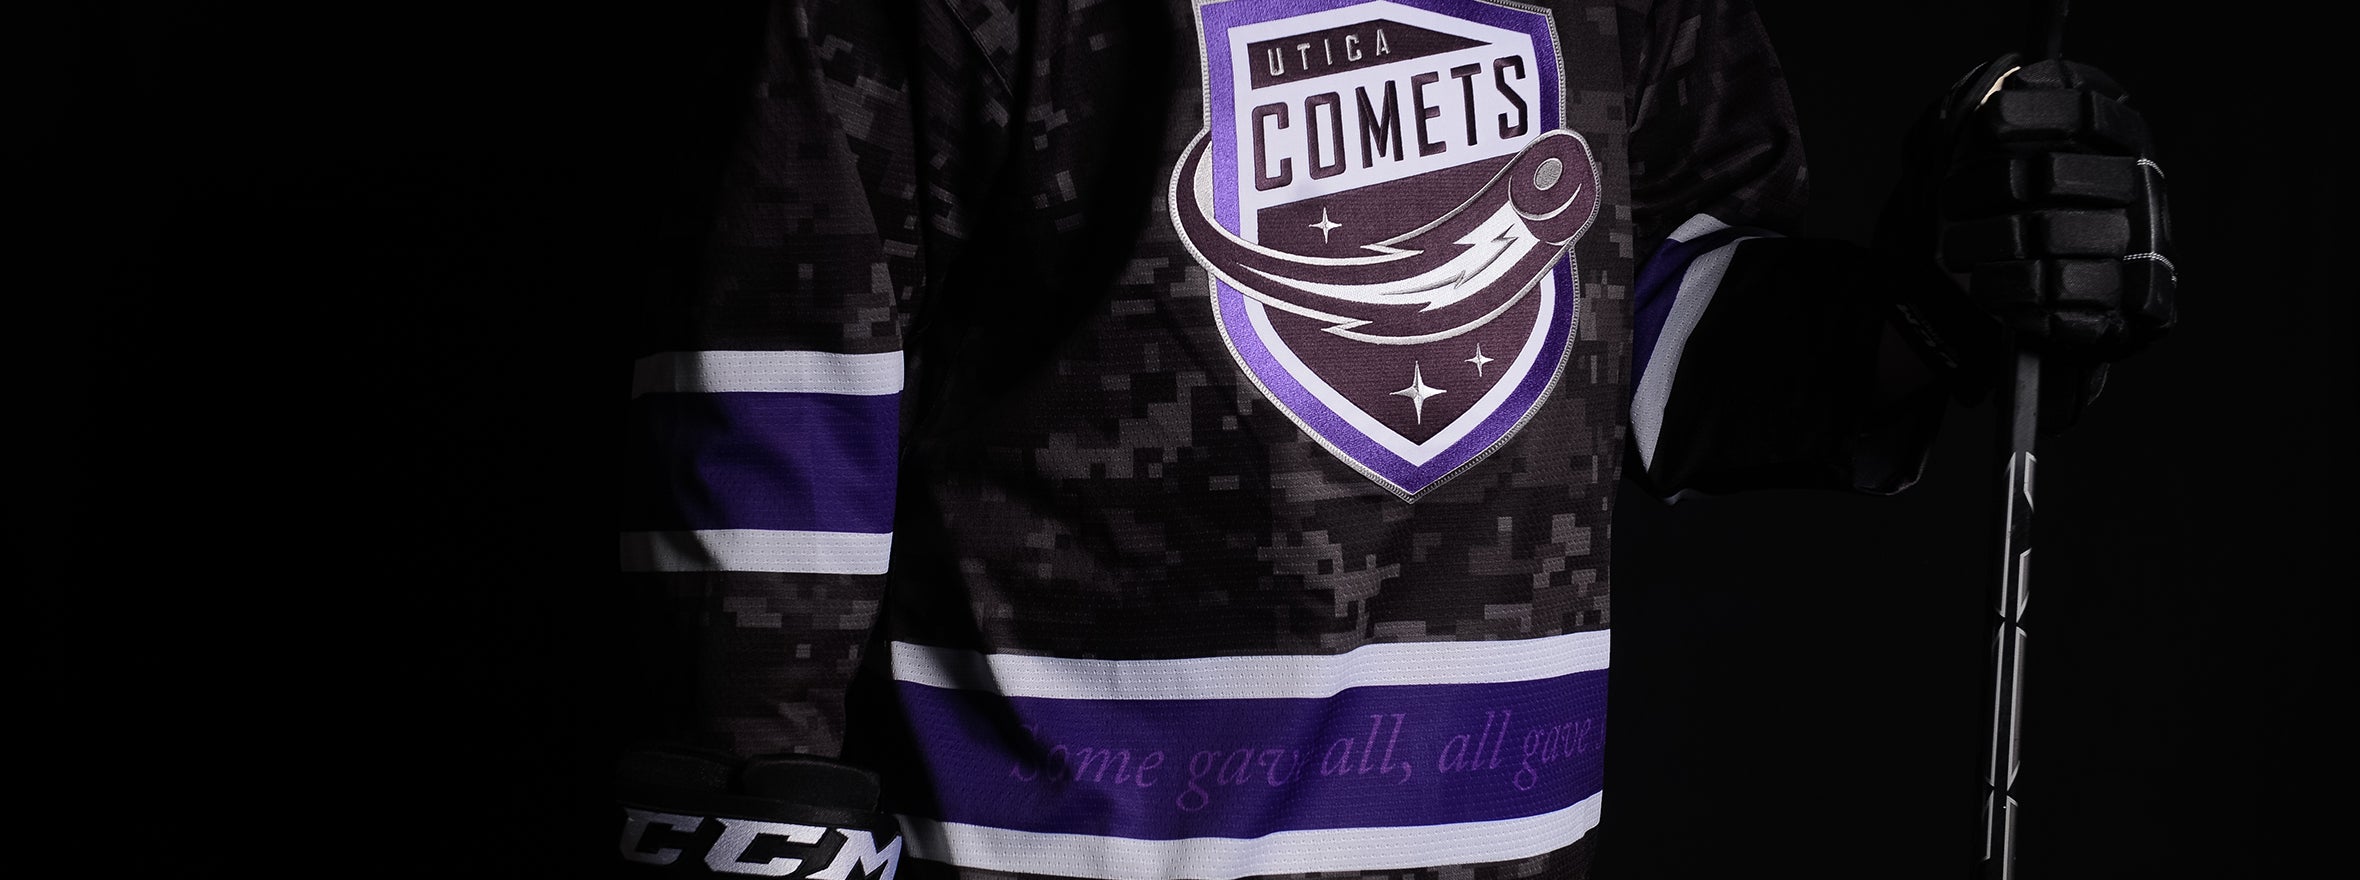 The Utica Comets are going to wear jerseys inspired by the Canucks